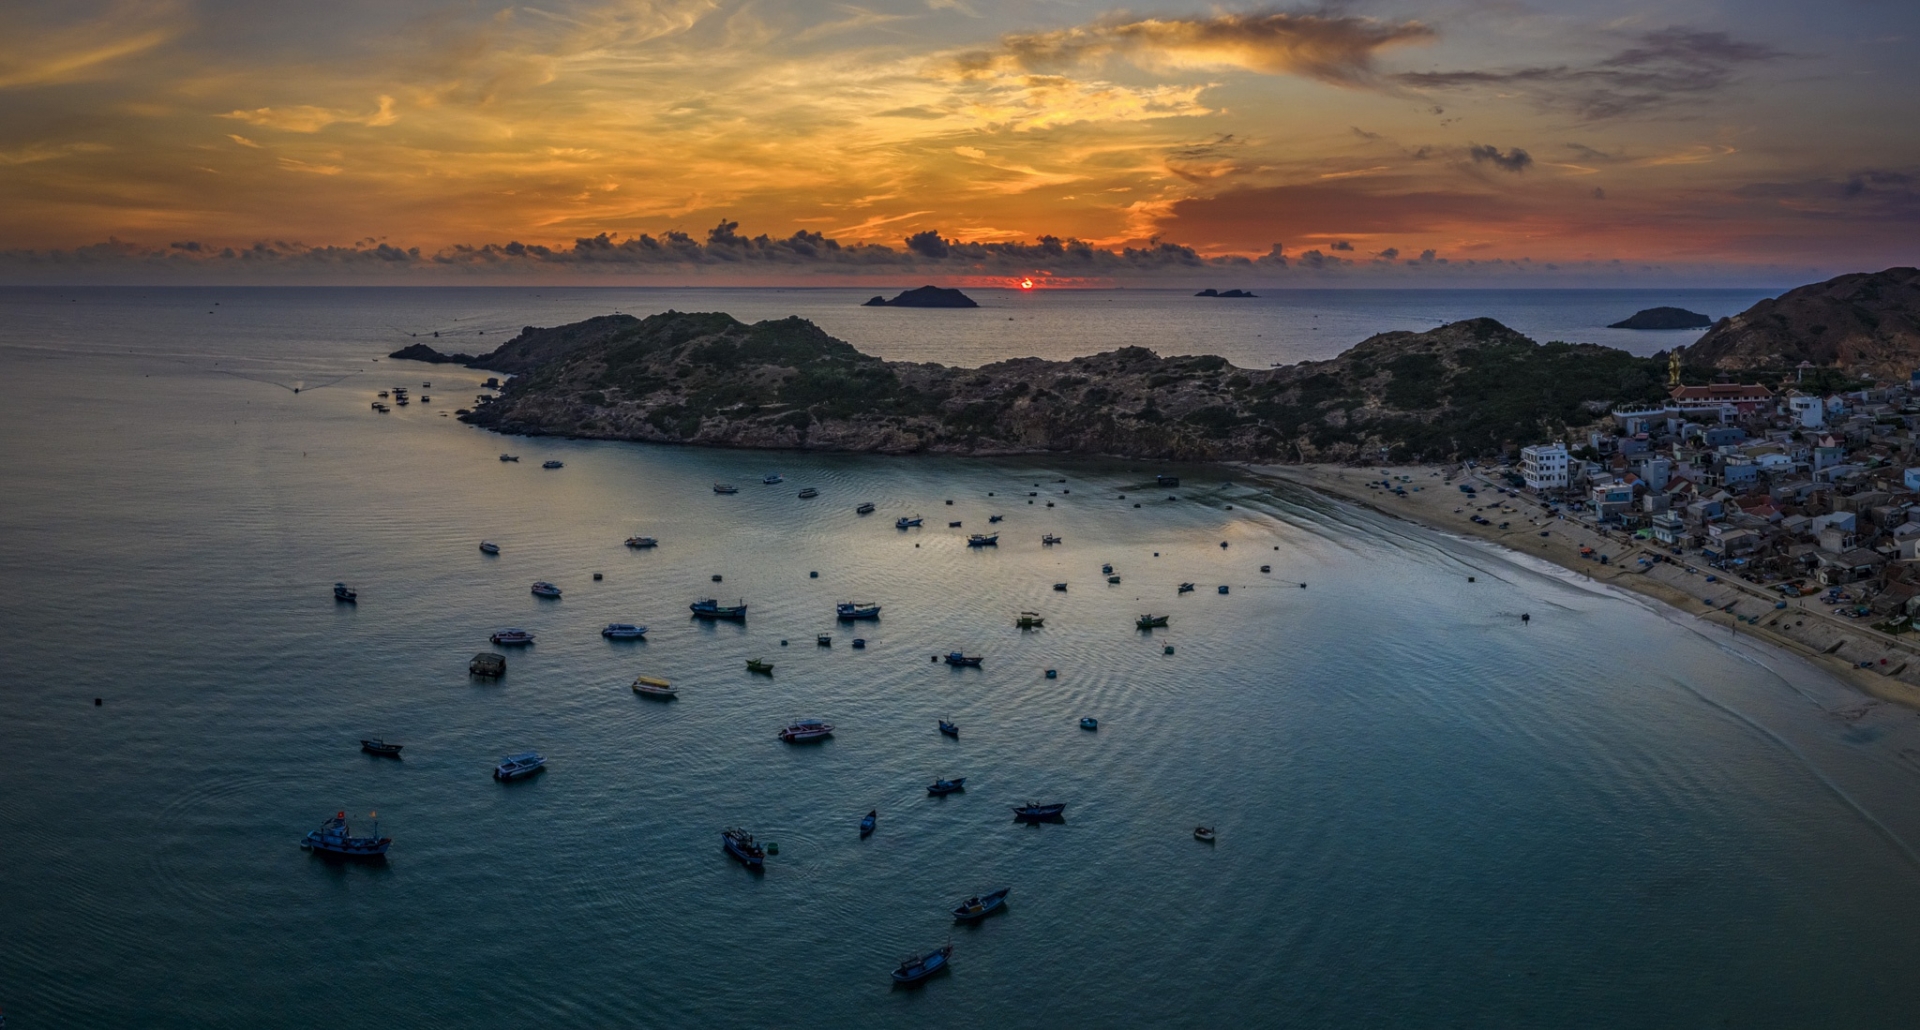 a glimpse of the wild and peaceful quy nhon